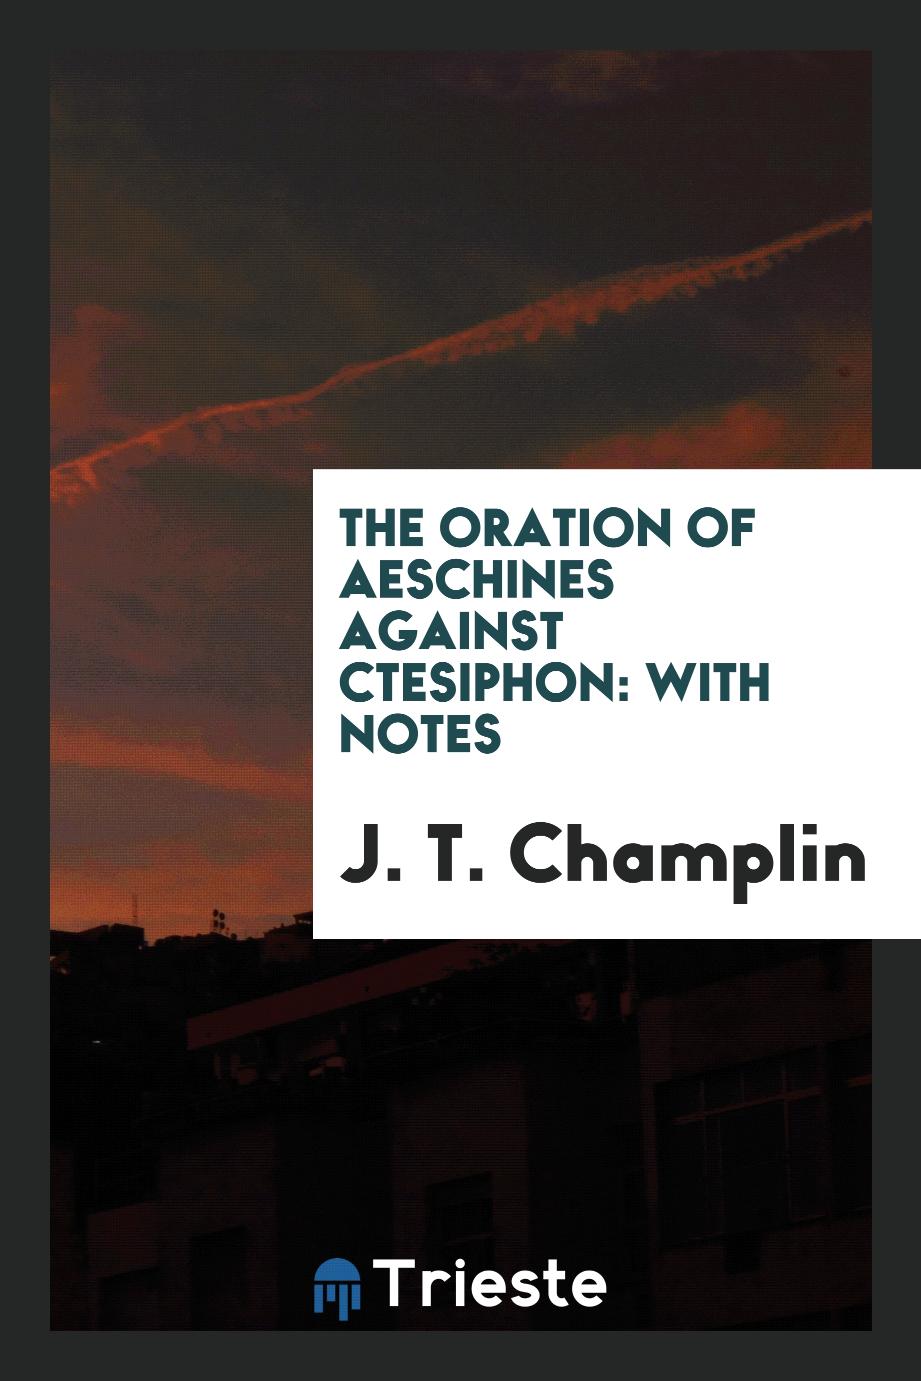 The oration of Aeschines against Ctesiphon: with notes